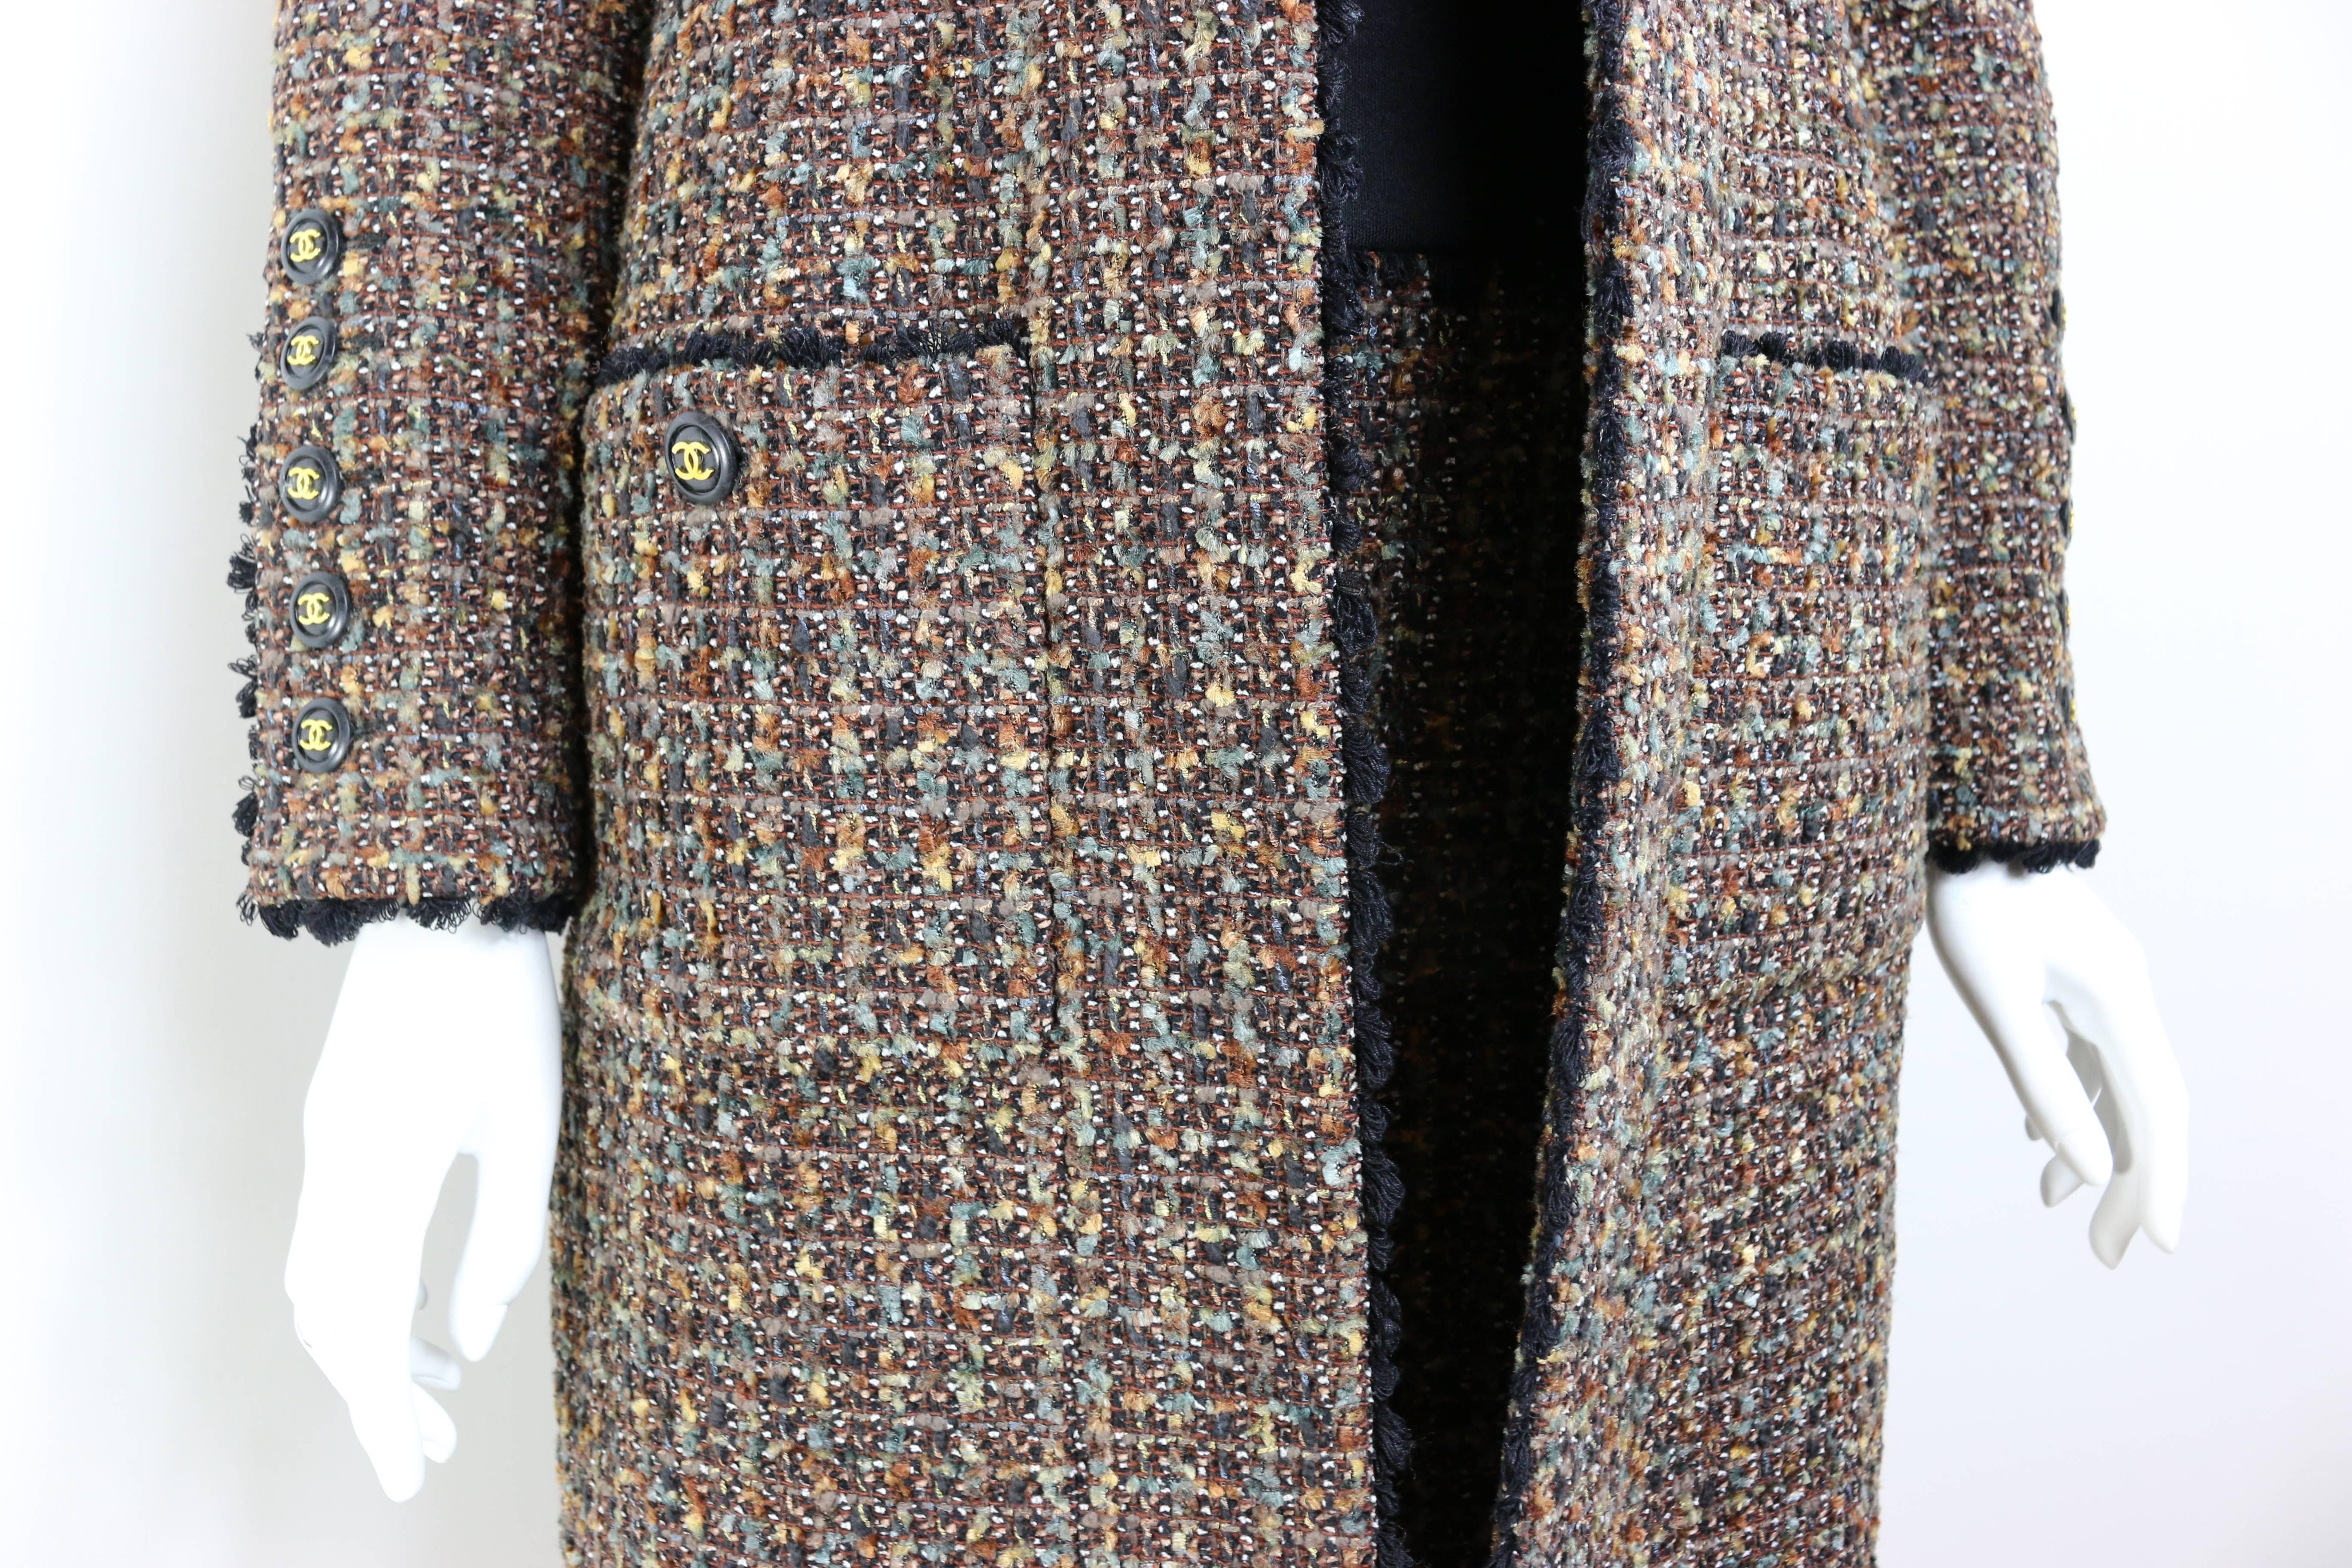 - Vintage Chanel brown/yellow/green/white/black wool tweed long coat and dress ensemble  from fall 1994 collection. 

- Featuring four front pockets buttons and five buttons on each cuff. 

- Straight lined coat. 

- Black trimming throughout the